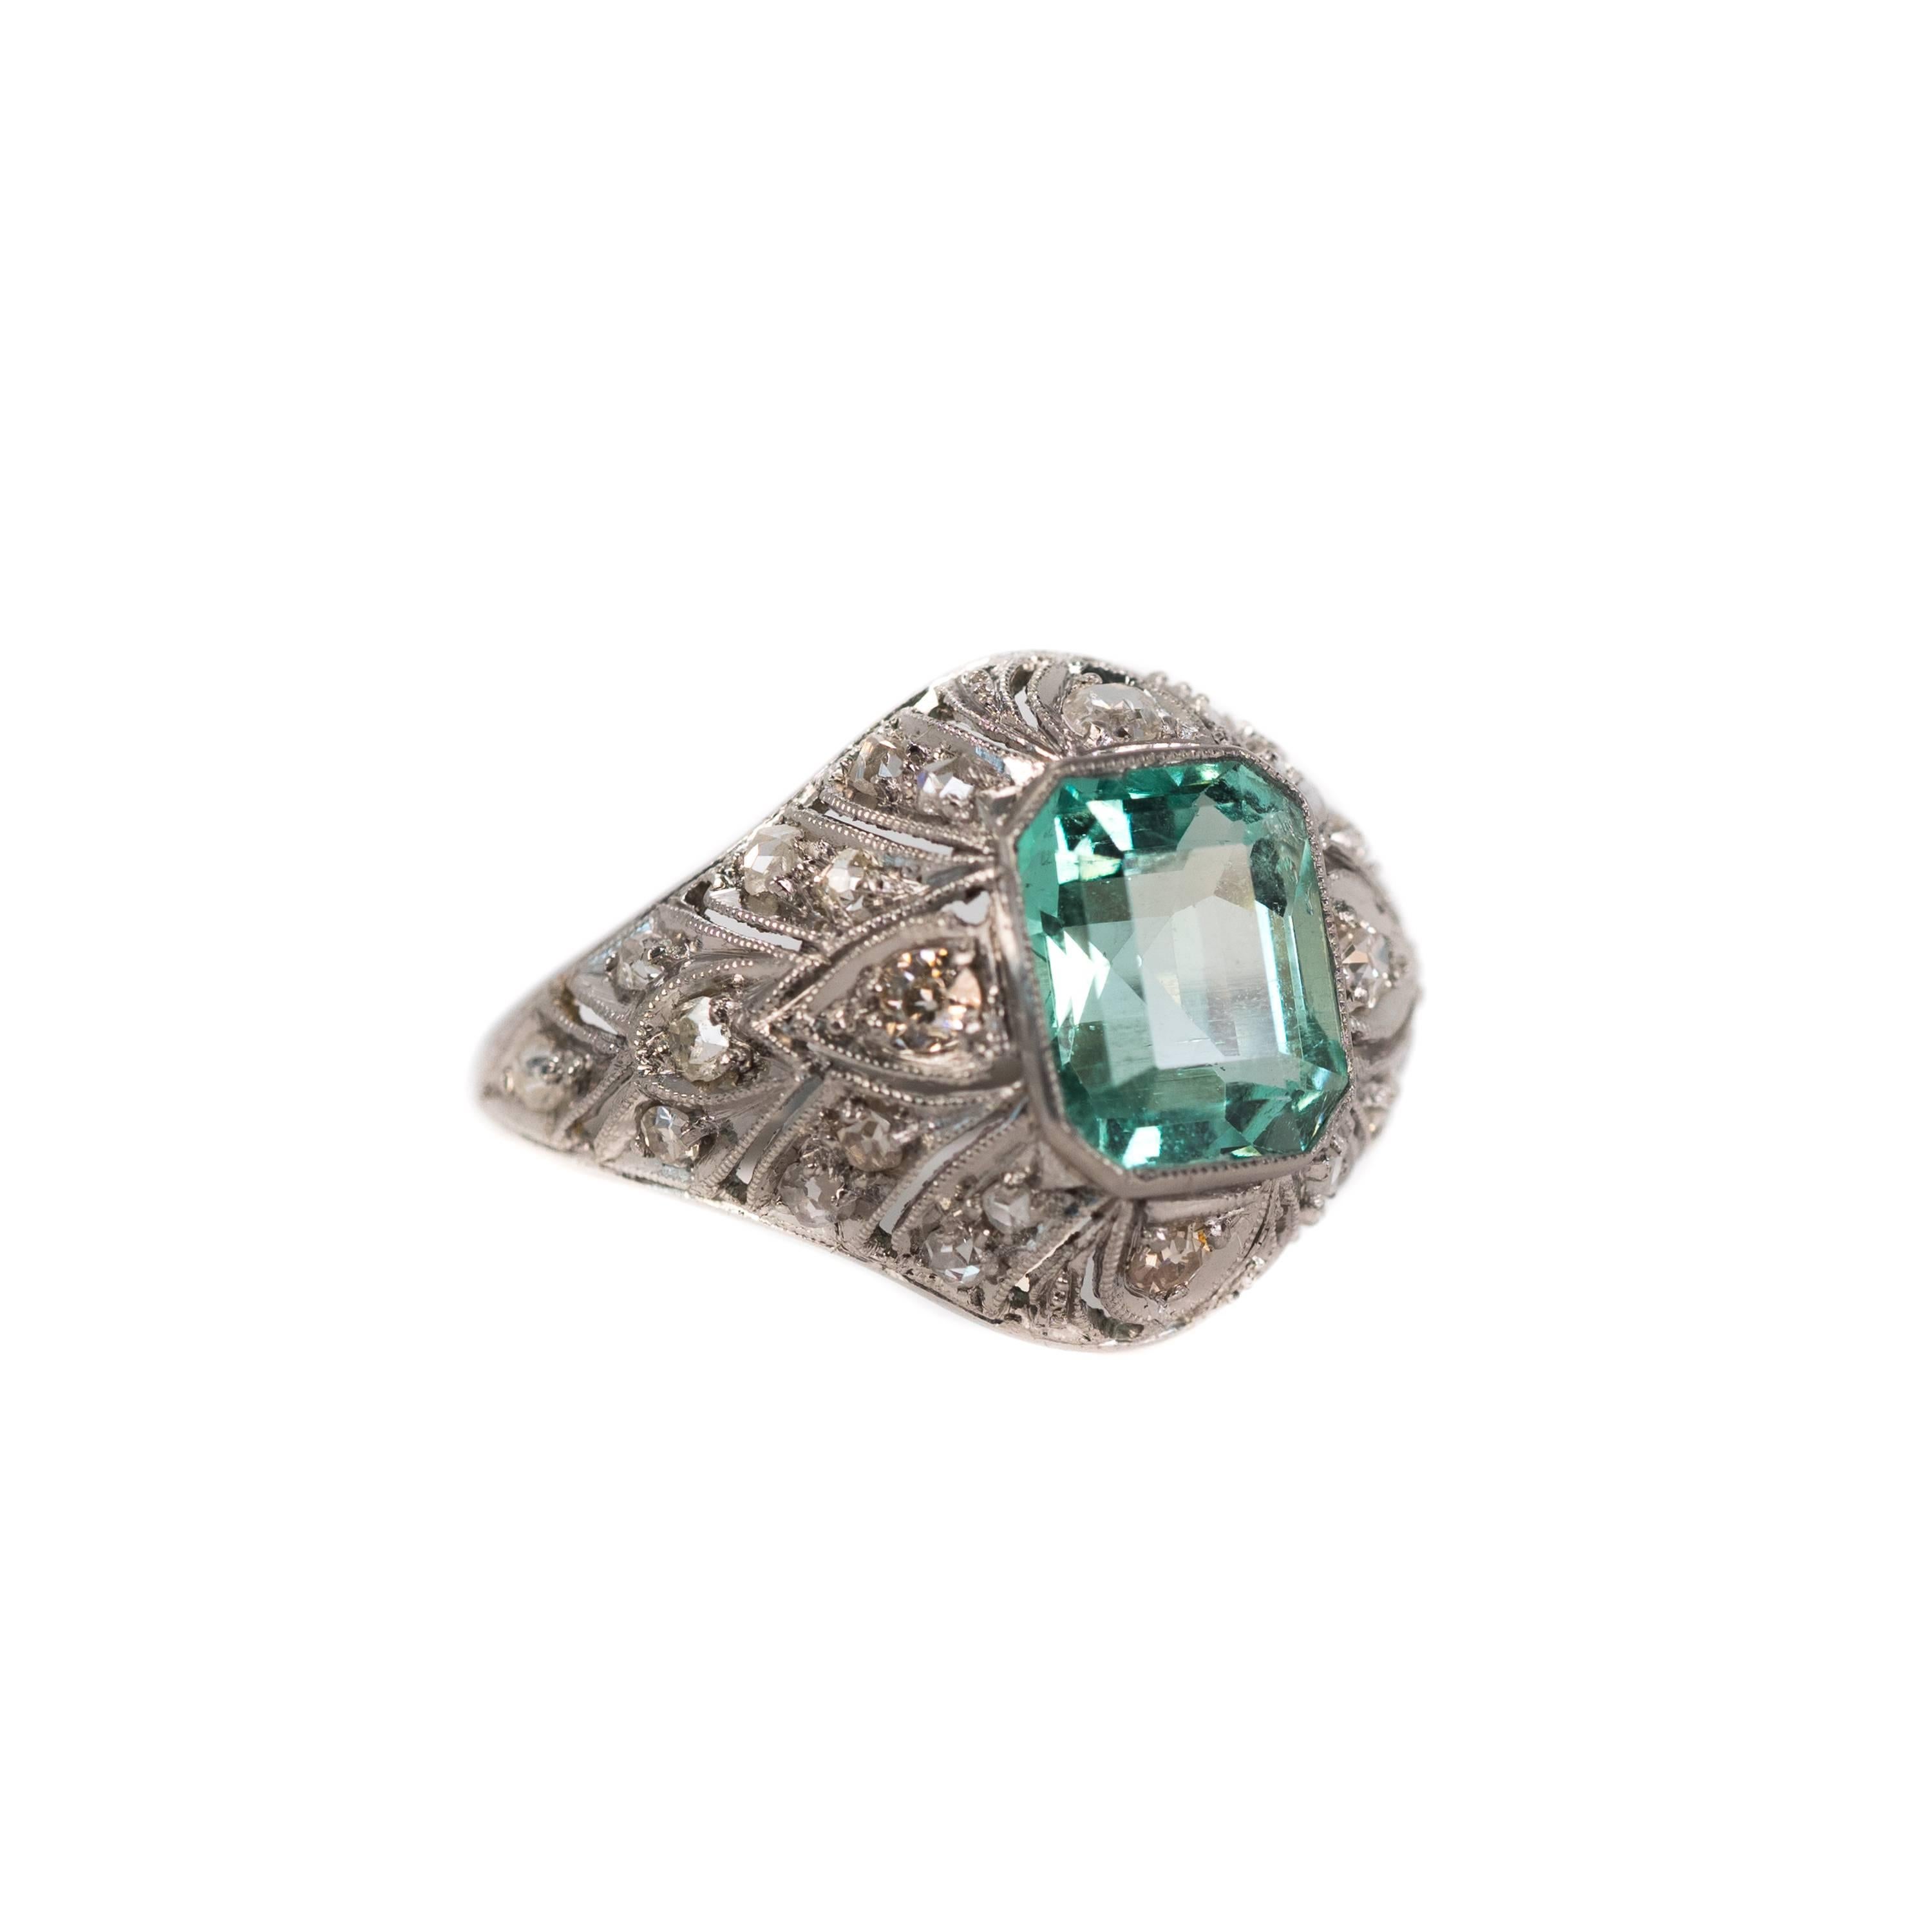 1915 Edwardian 3 Carat Emerald Engagement Ring - Platinum, Colombian Emerald, Diamonds

Features a 3 ct Colombian Emerald center stone, .08 cttw Single cut Diamonds and Platinum. 
The Emerald center stone is exceptionally clear with a very light